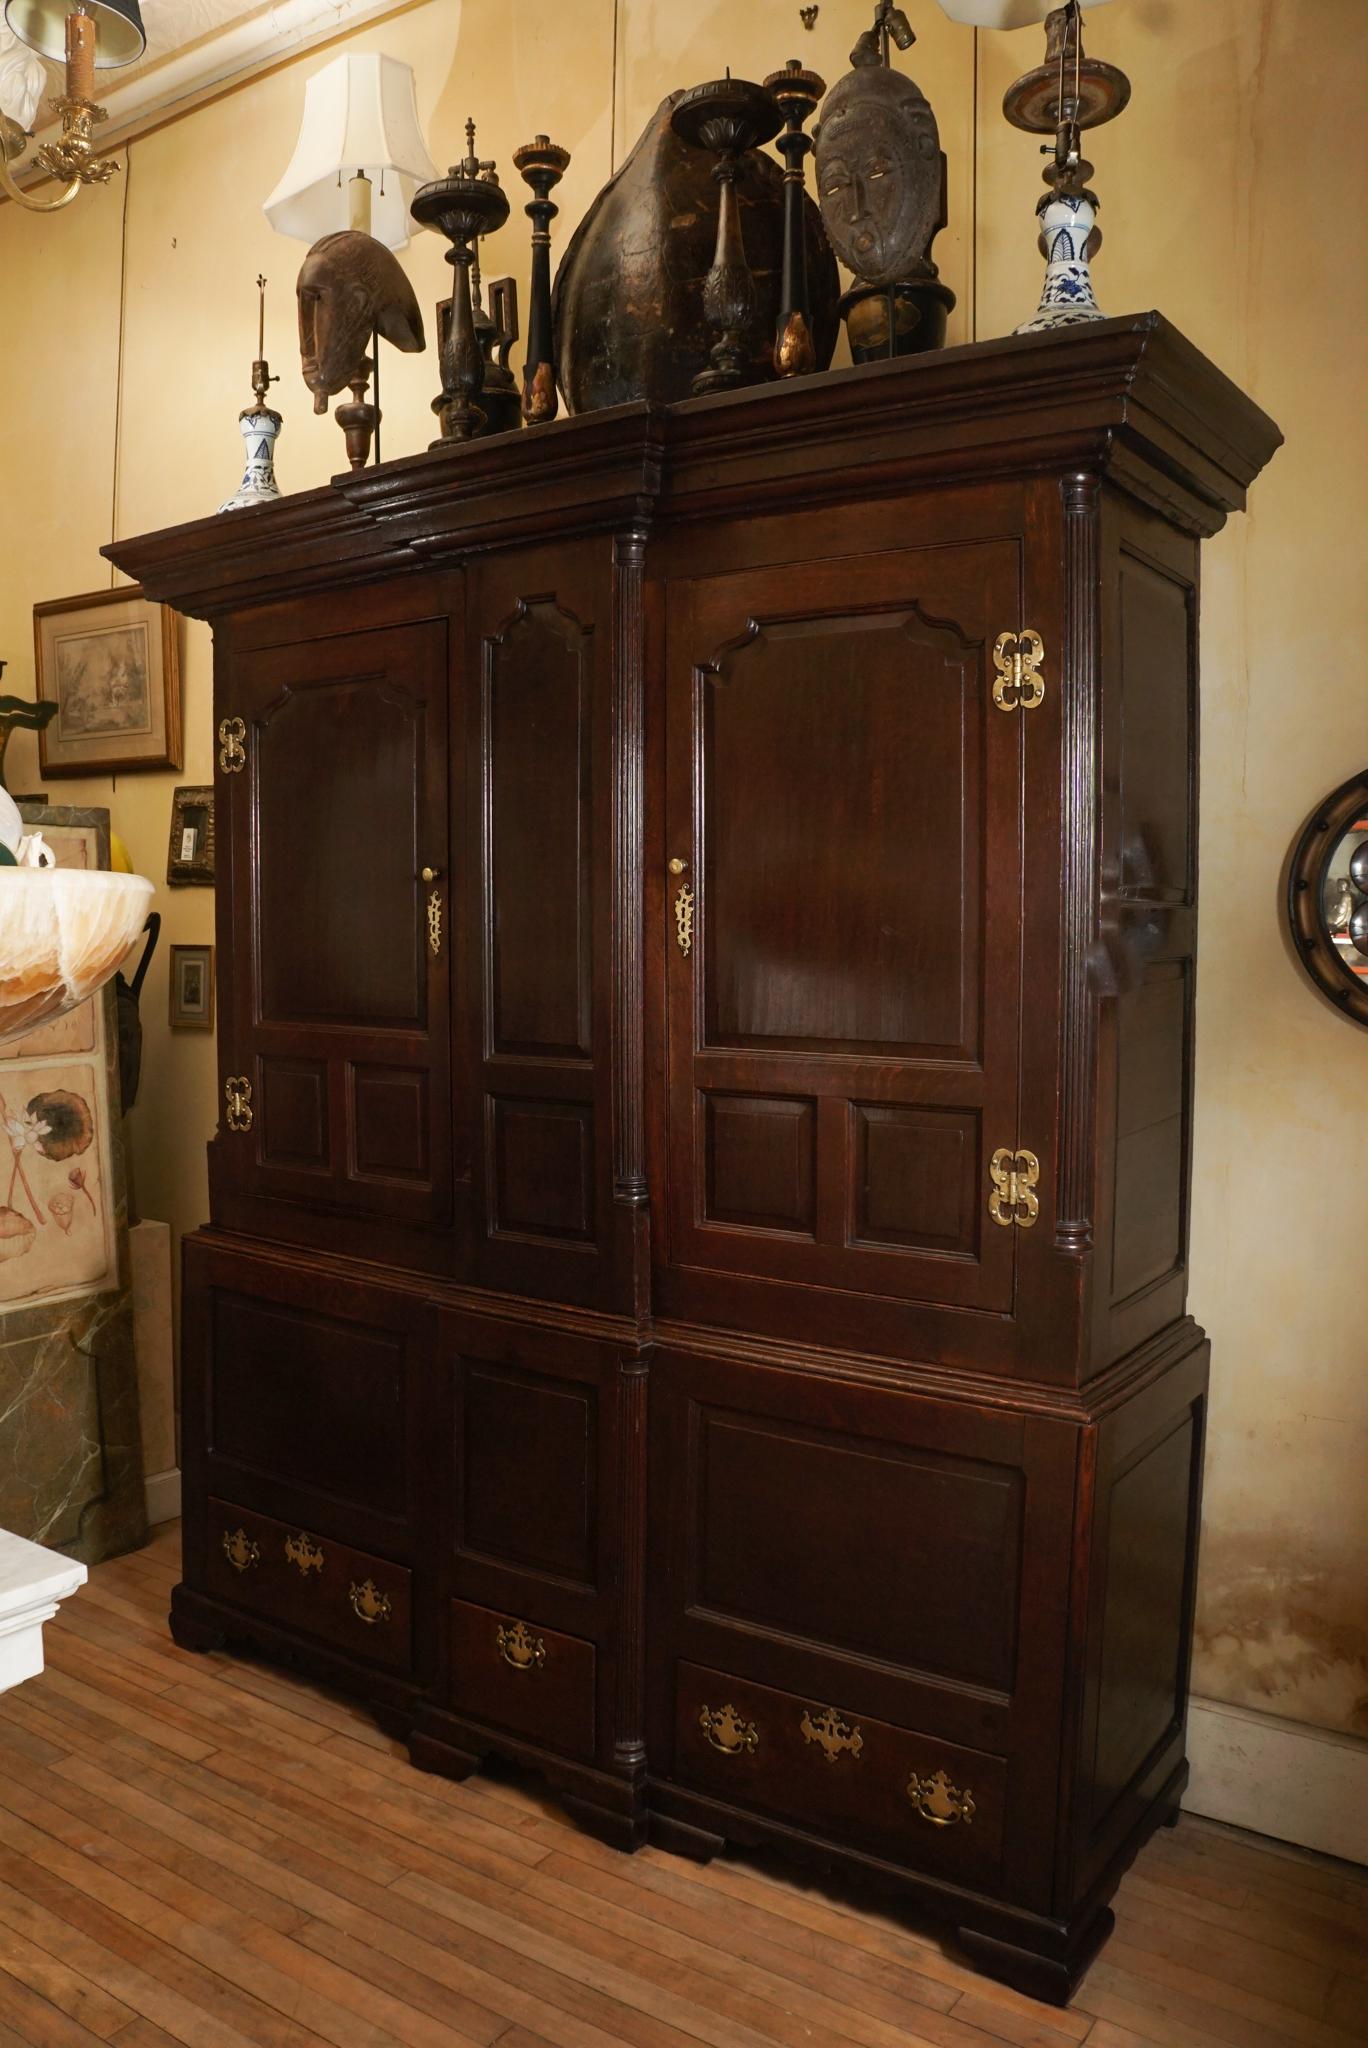 This wonderful old cupboard is crafted of sturdy English oak and was made circa 1740. Retaining its fine old surface, richly waxed and polished, the cabinet is comprised of a large two-door upper section the extends past the door line into the lower